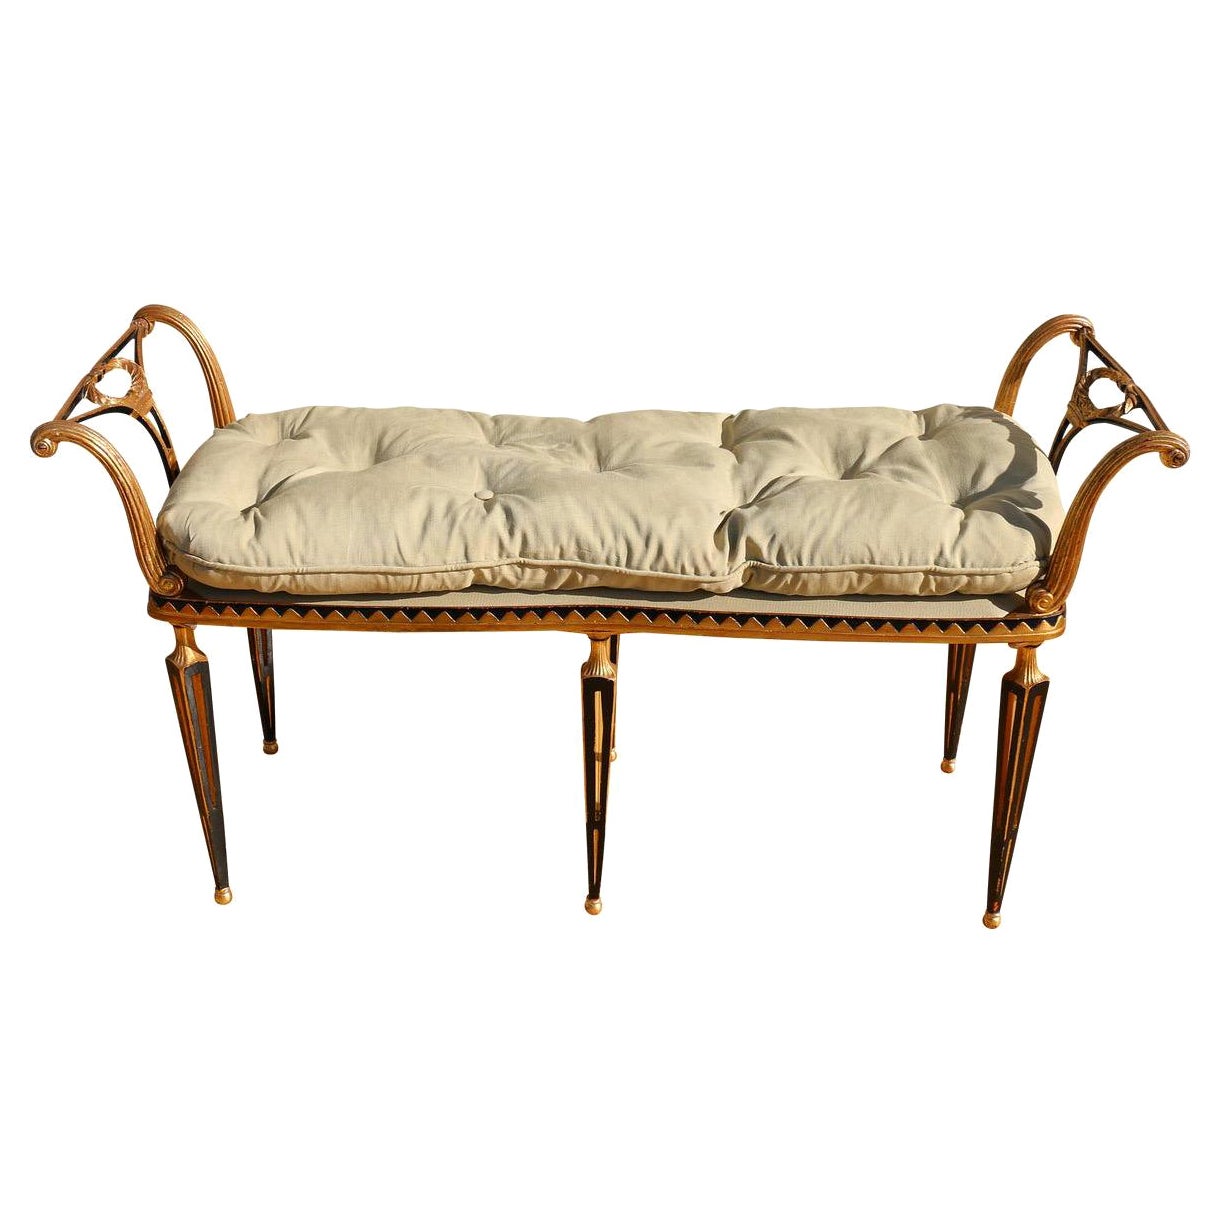 Vintage 1960’s Hollywood Regency Style Bench by Palladio For Sale